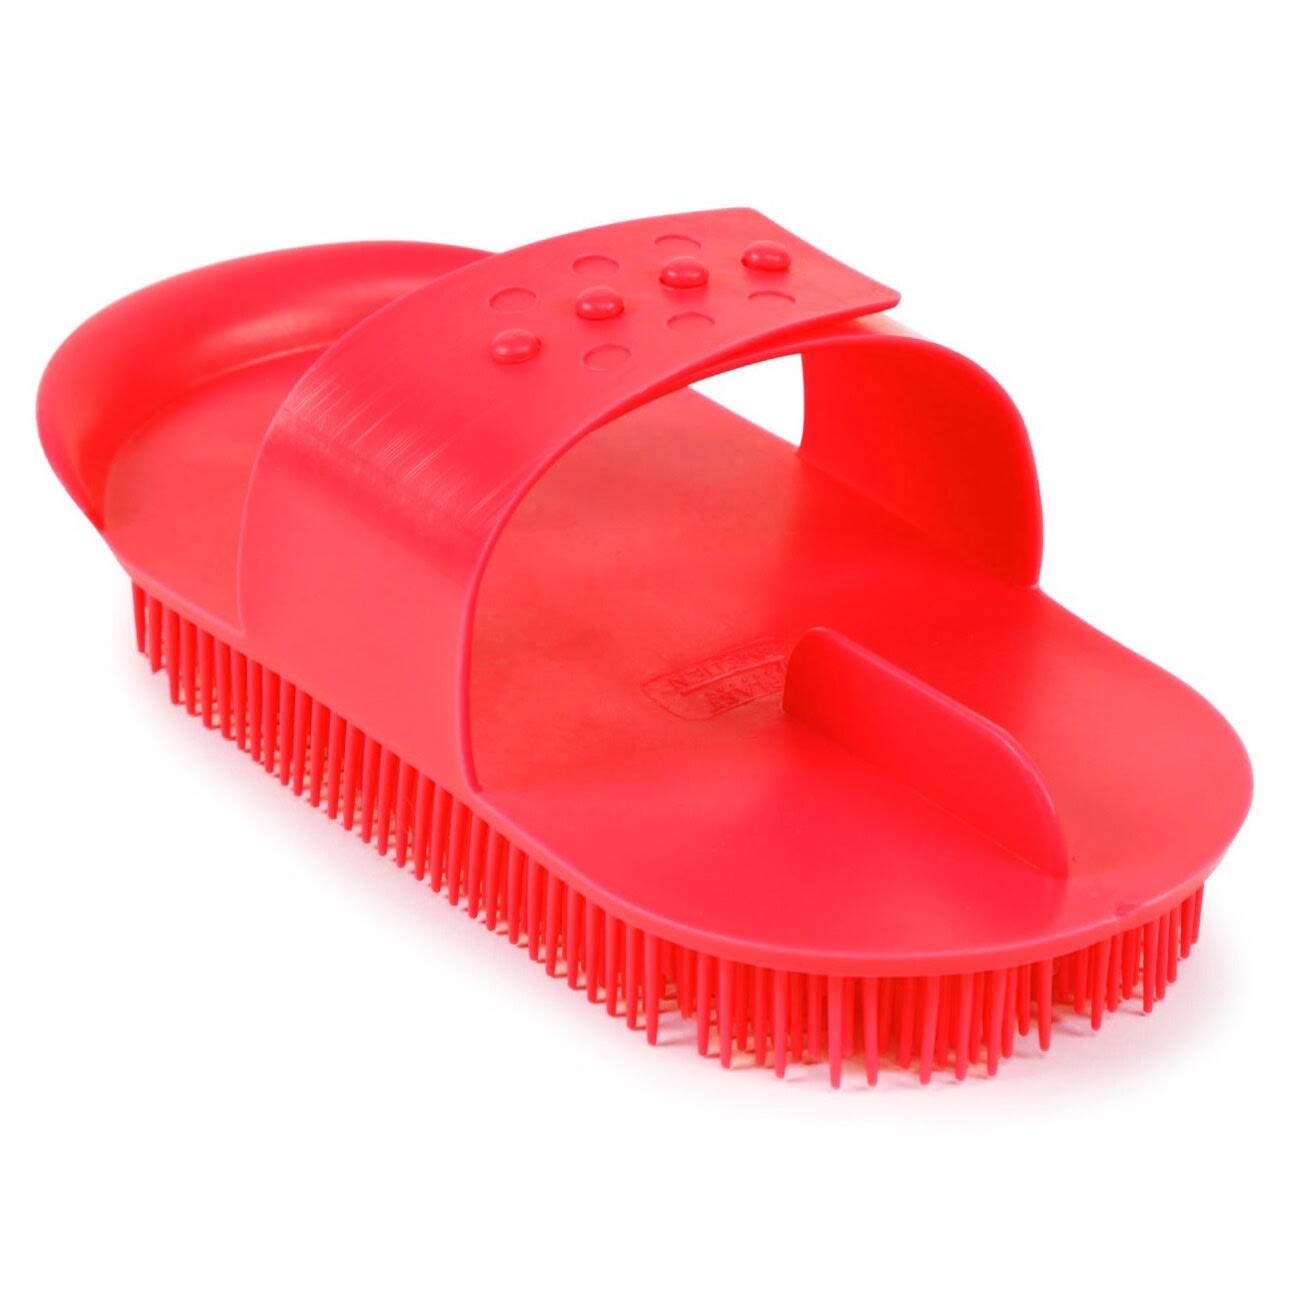 Plastic Horse Curry Comb (Red) 4/4